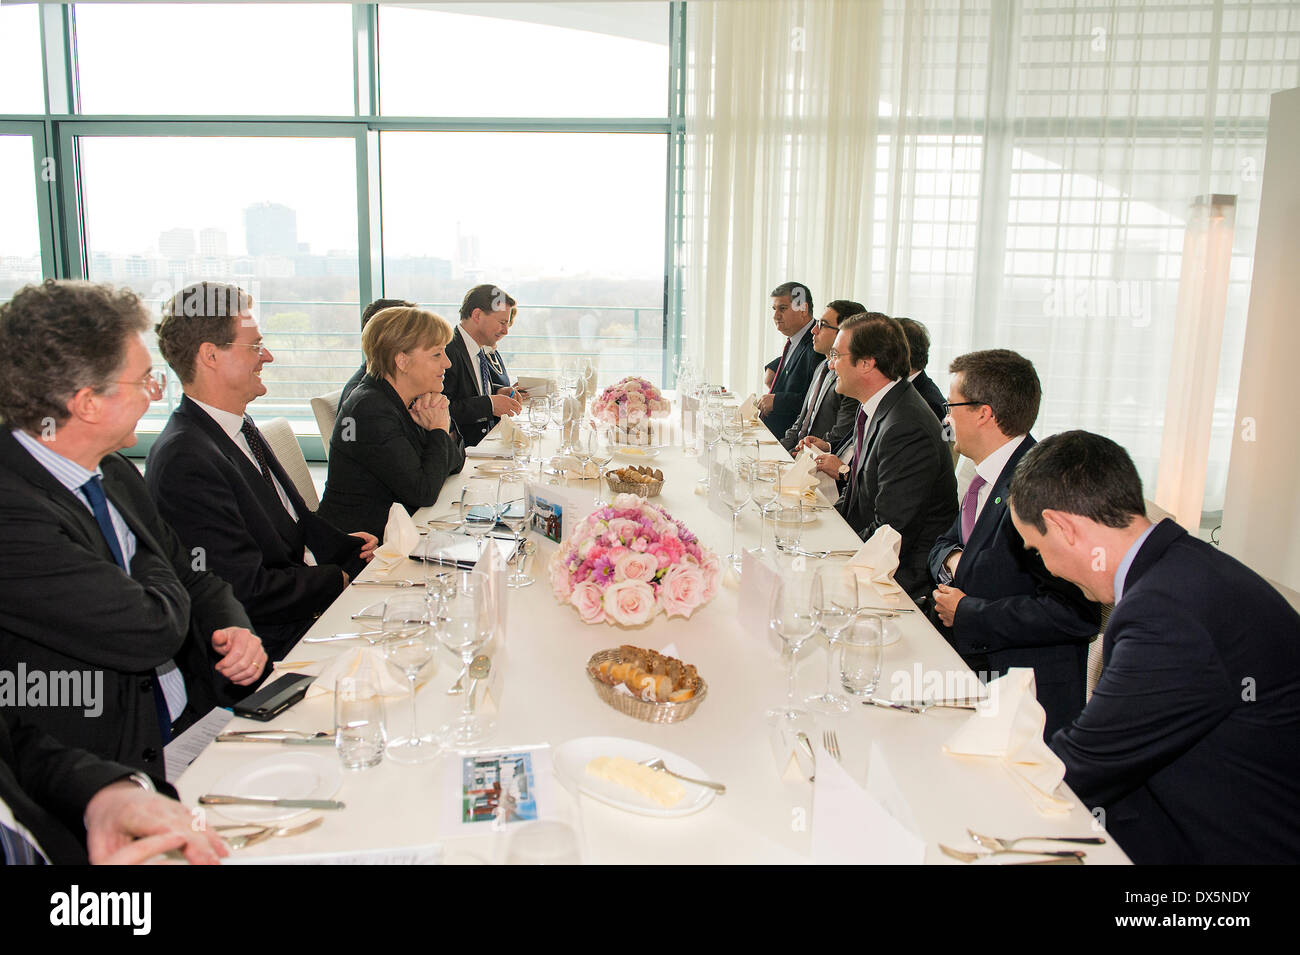 Berlin, Germany. March 18th 2014. German Chancellor Angela Merkel receives in the Federal Chancellery the Portuguese Prime Minister Passos Coelho for a Bilateral meeting. Goncalo Silva/Alamy Live News Stock Photo